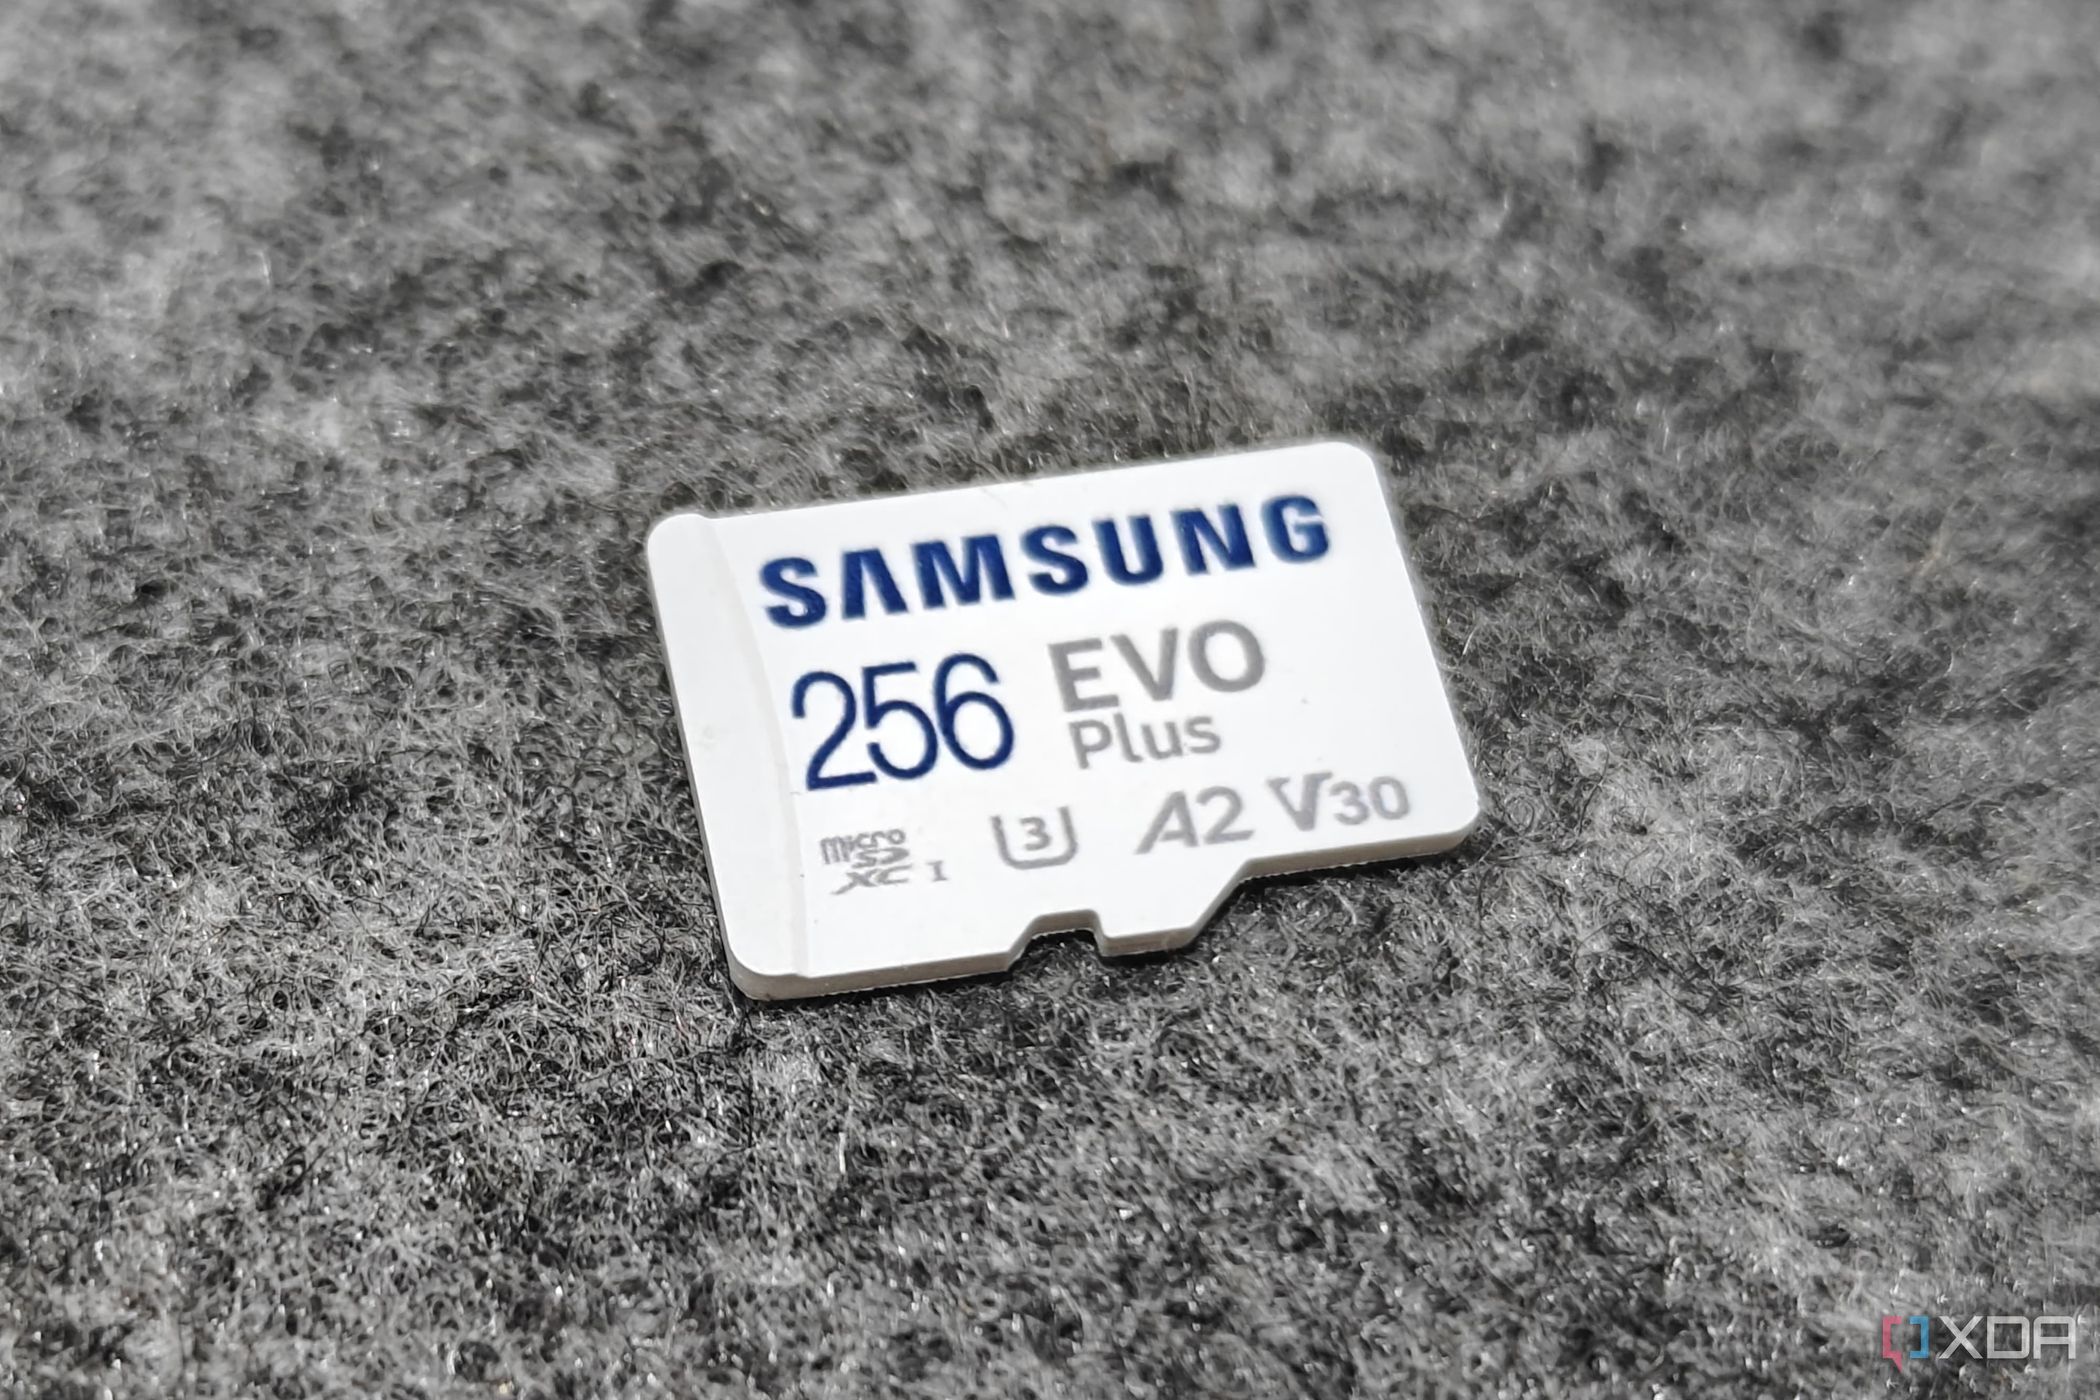 An image showing the front side of a microsd card kept on a felt pad.